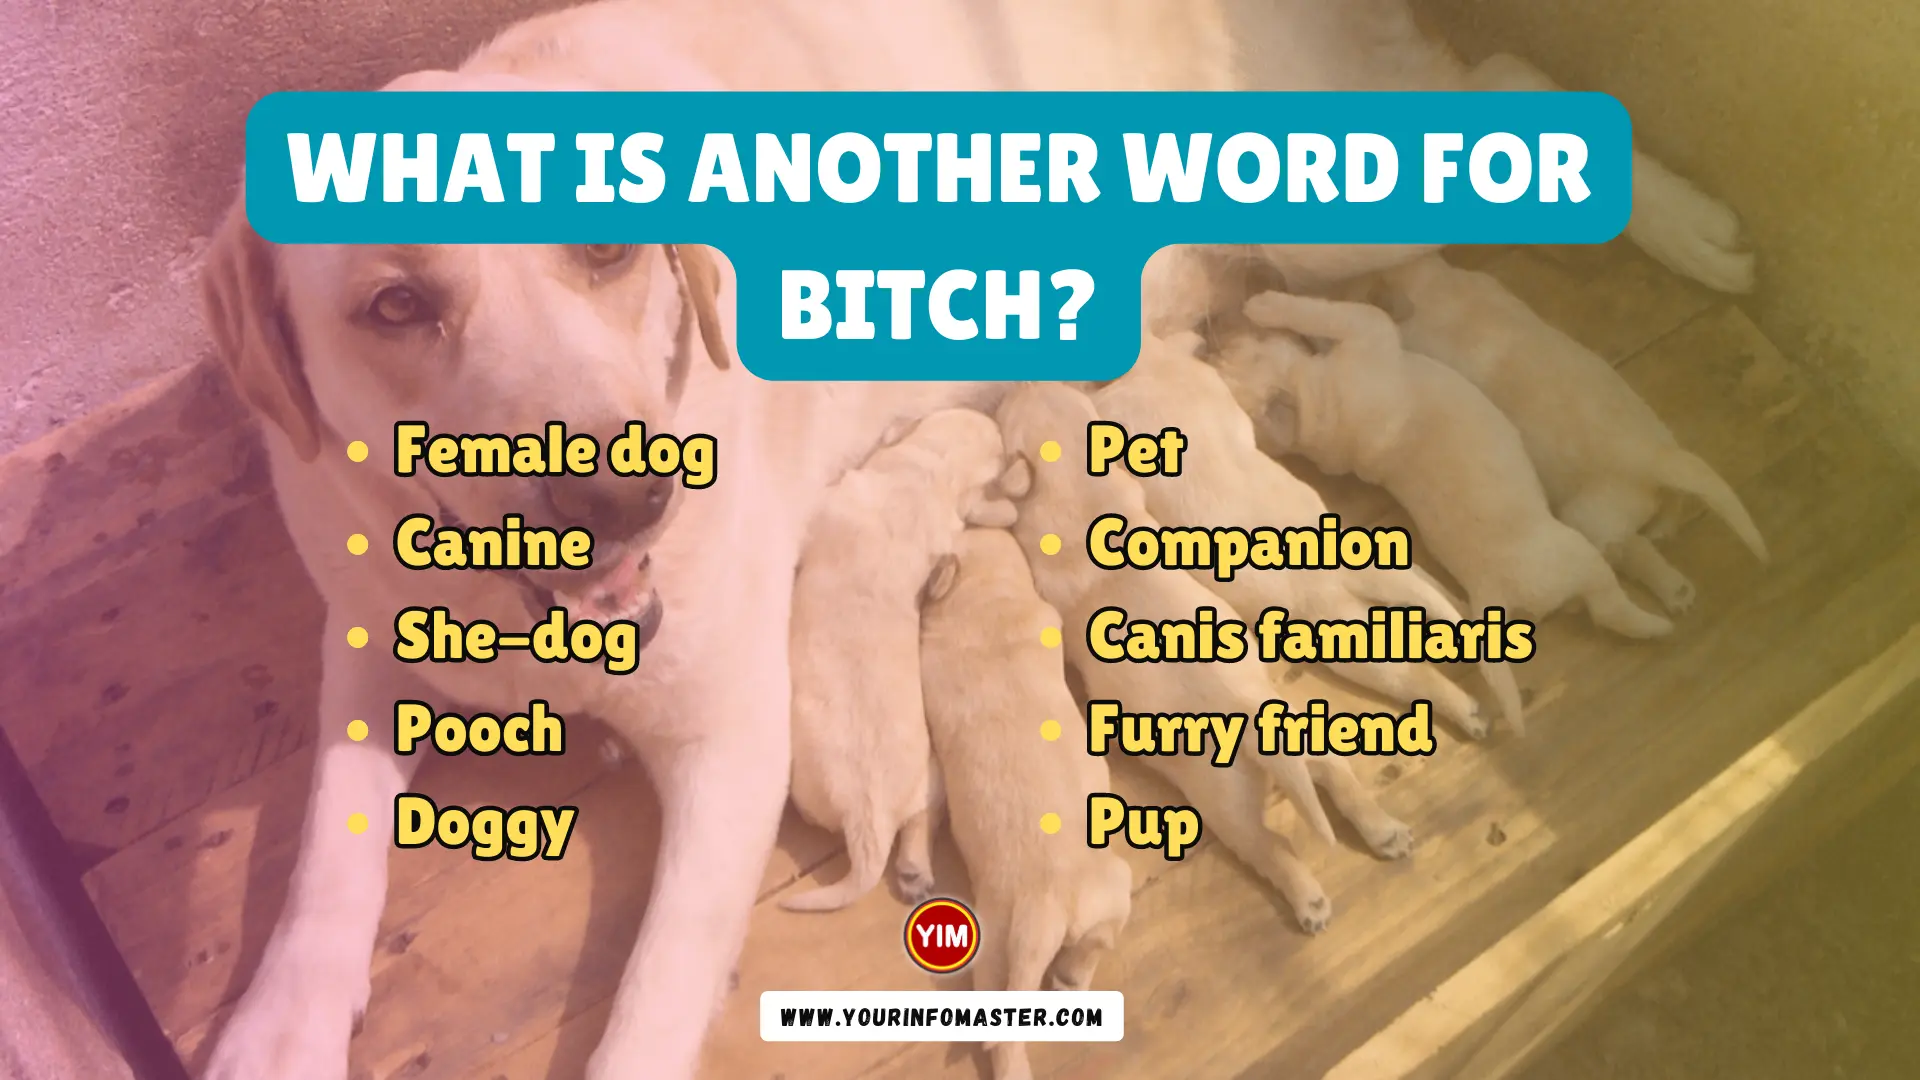 What is another word for Bitch